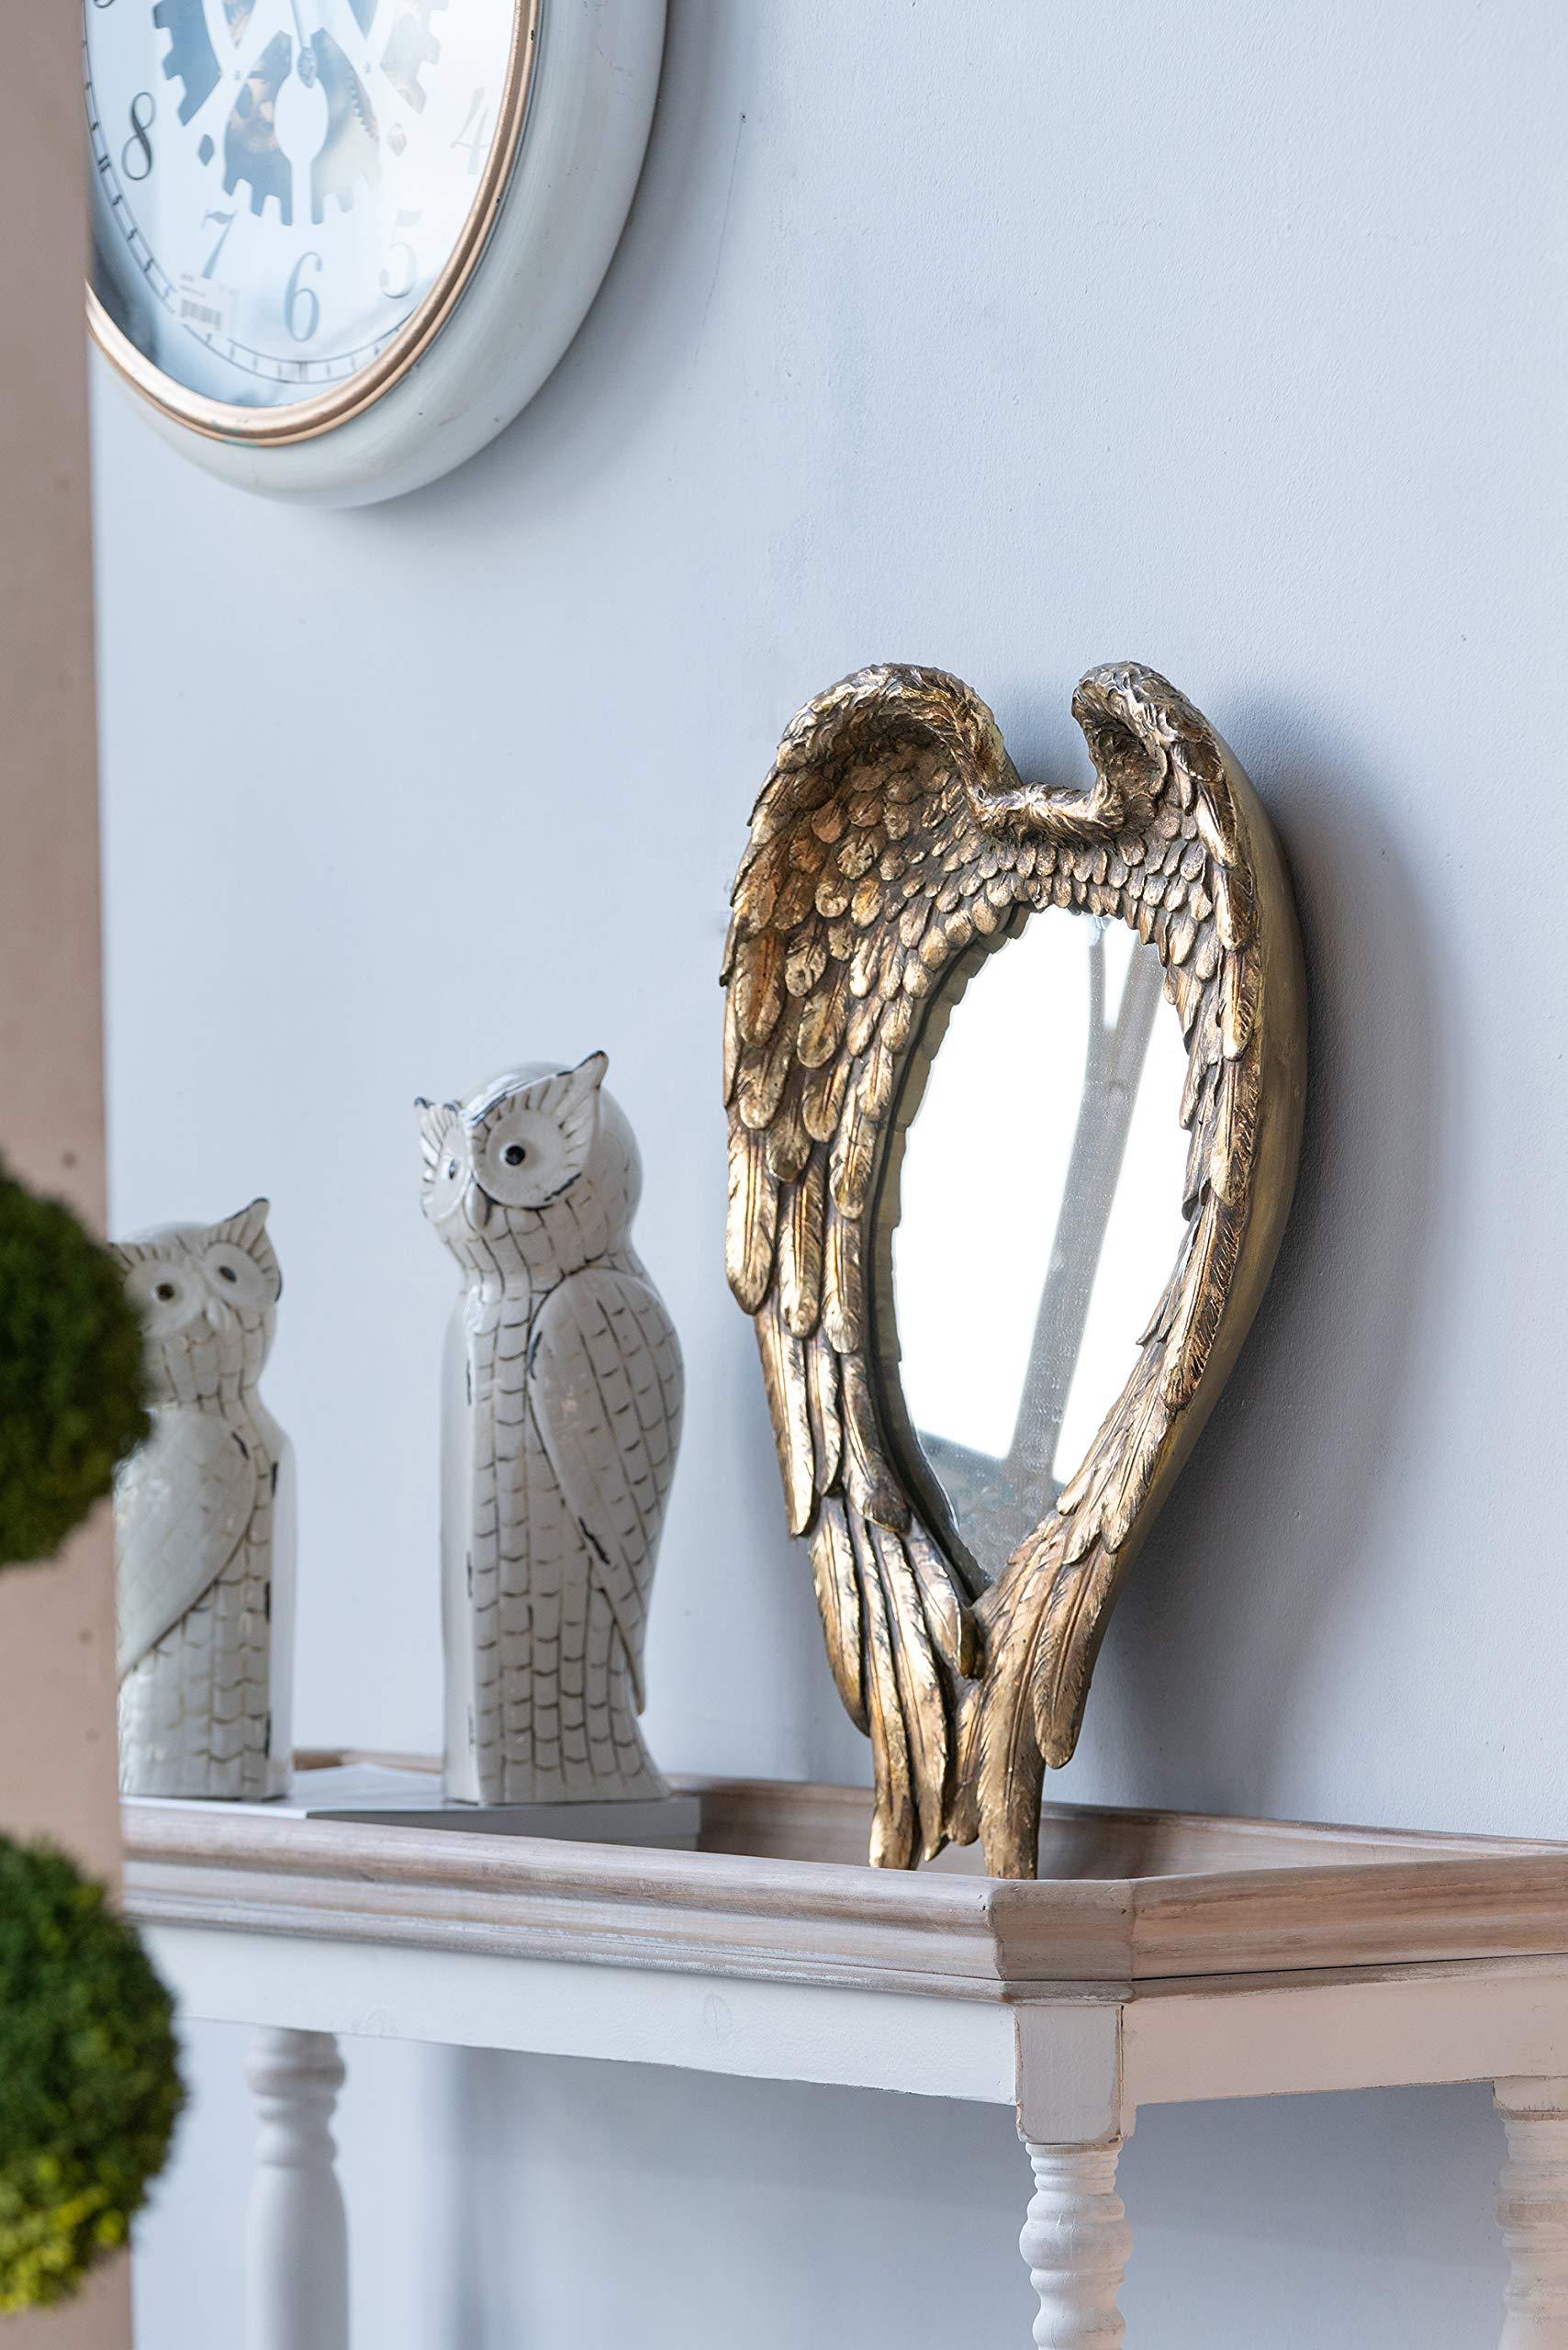 22" x 16" Golden Wing Accent Mirror, Wall Mirror